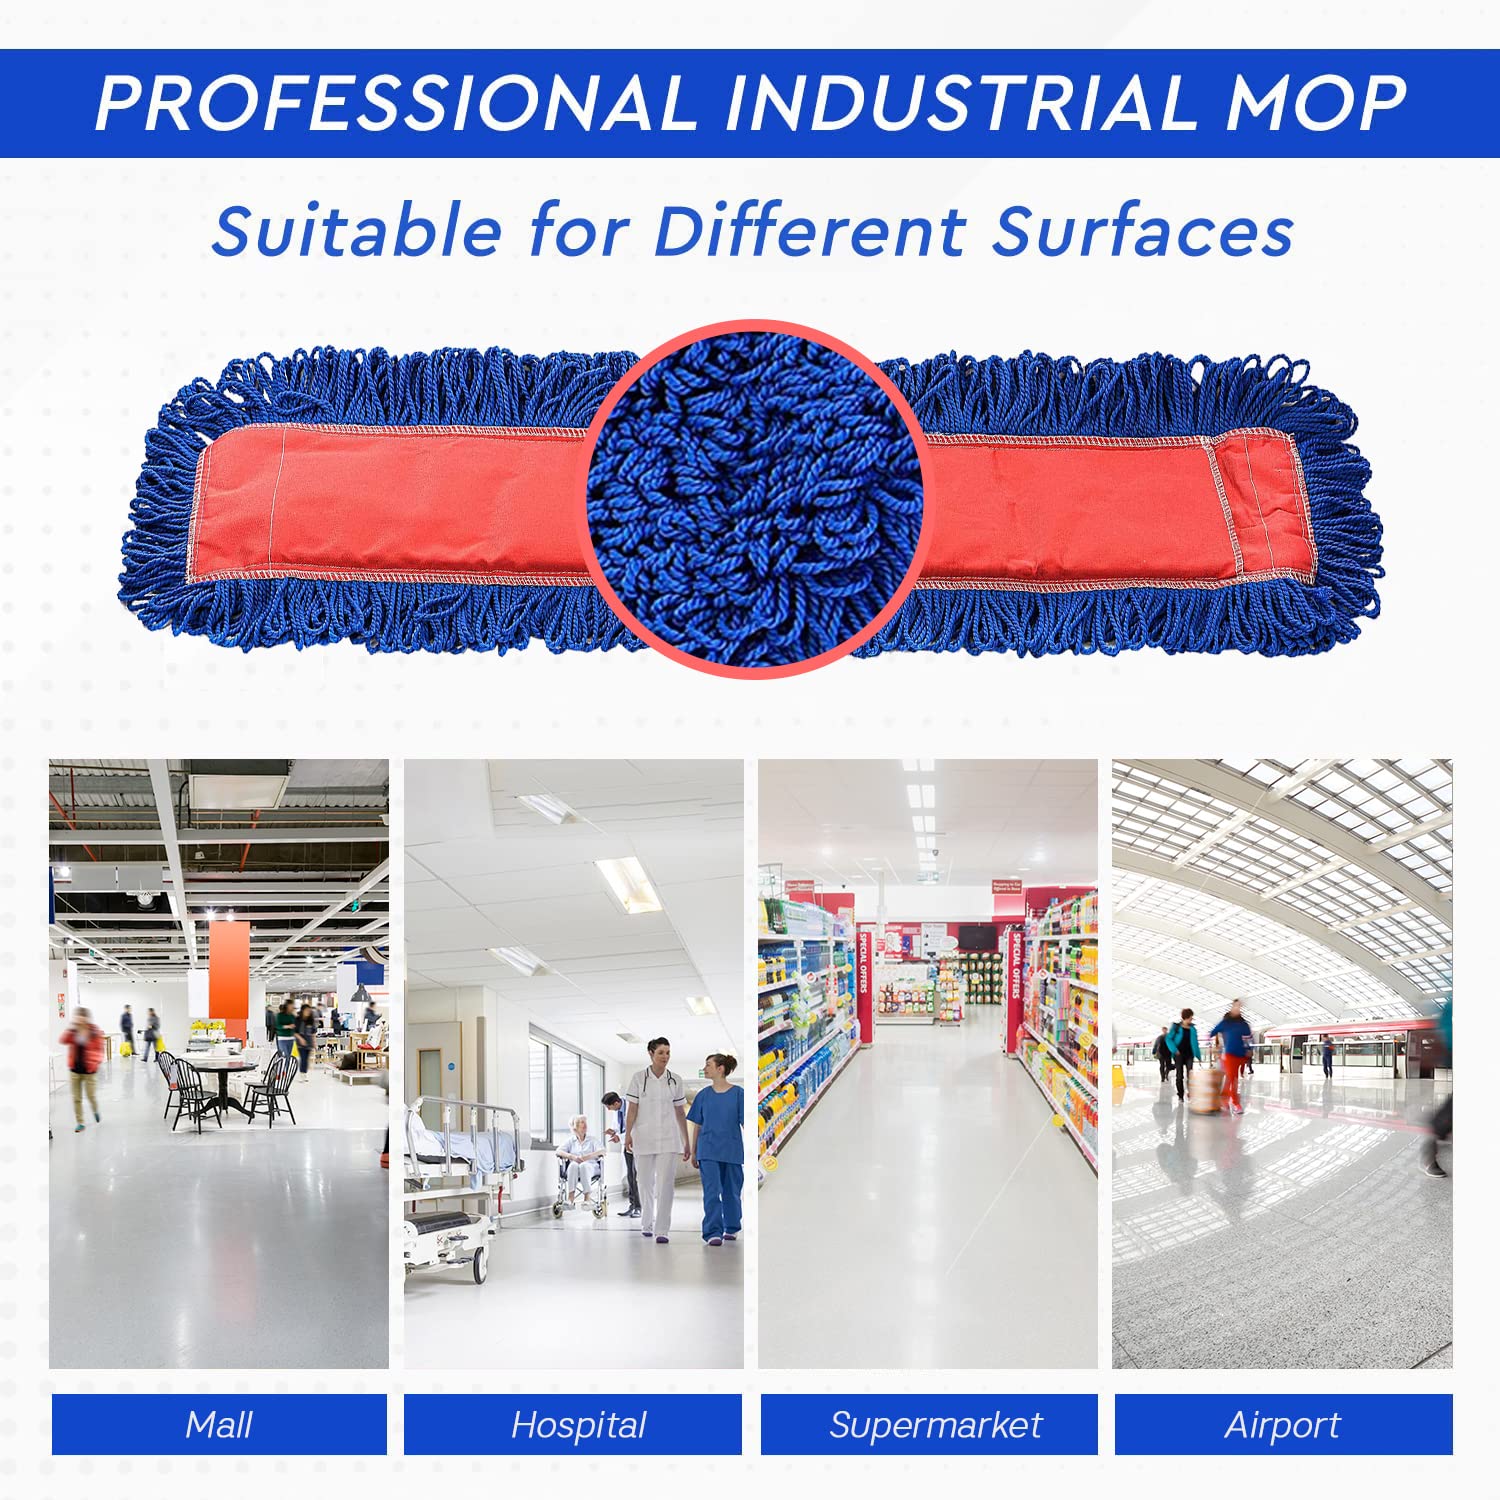 Alpine Industries Heavy Duty Microfiber Mop Head - Cleans Wide Areas - Commercial Super Absorbent Mop Head (36 in, Single Pack)